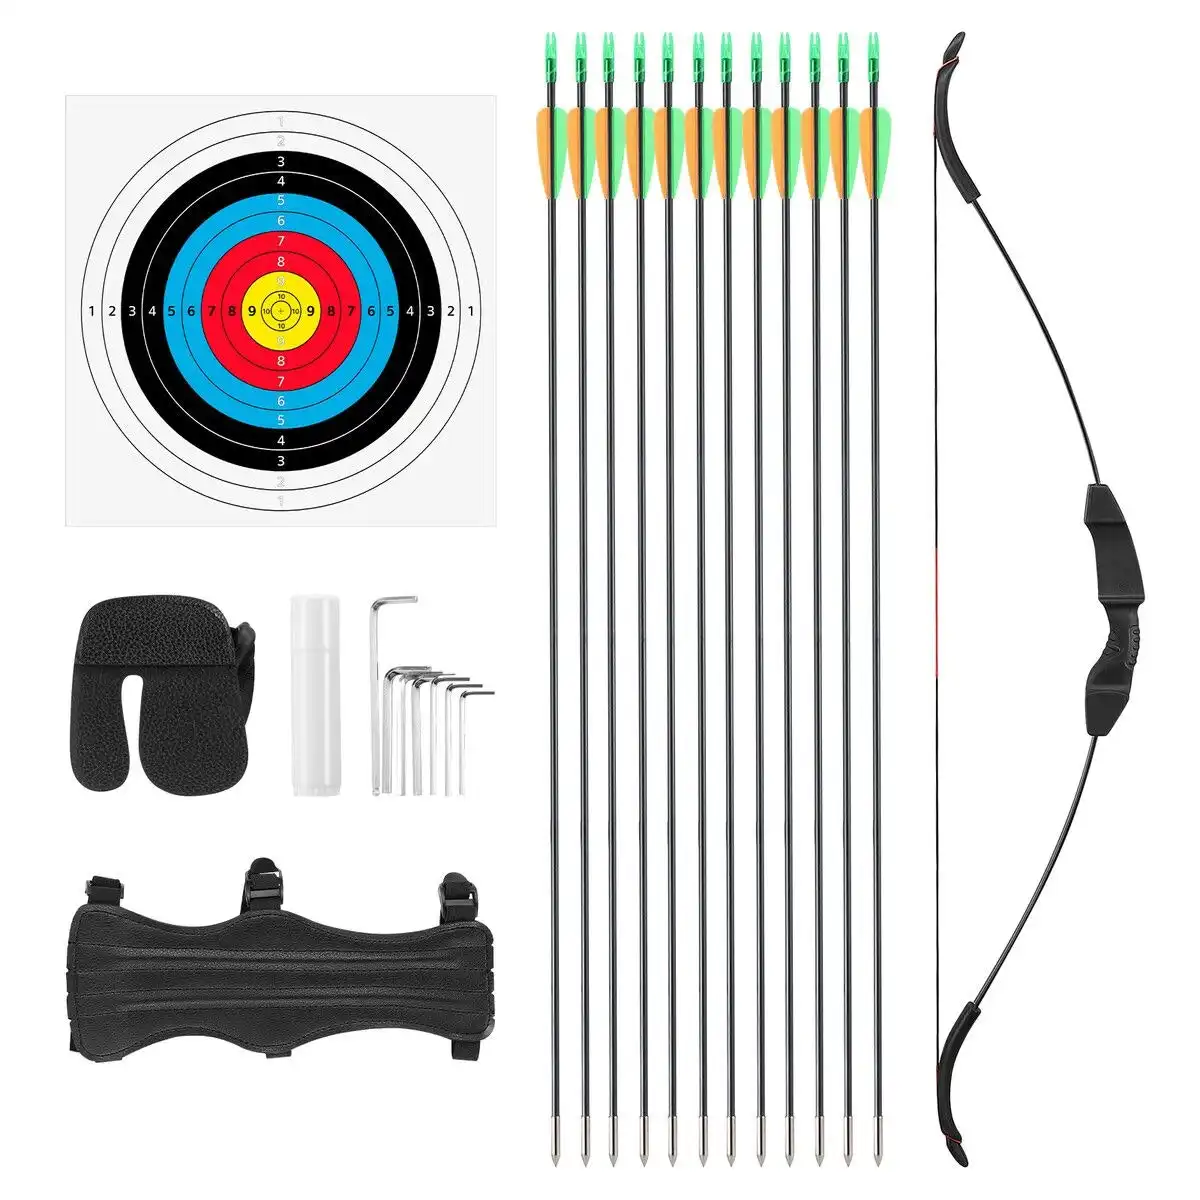 Ausway 20lbs Recurve Bow Arrow Set Sports Archery Outdoor Hunting Equipment Target Shooting 20lbs Left Right Handed Black